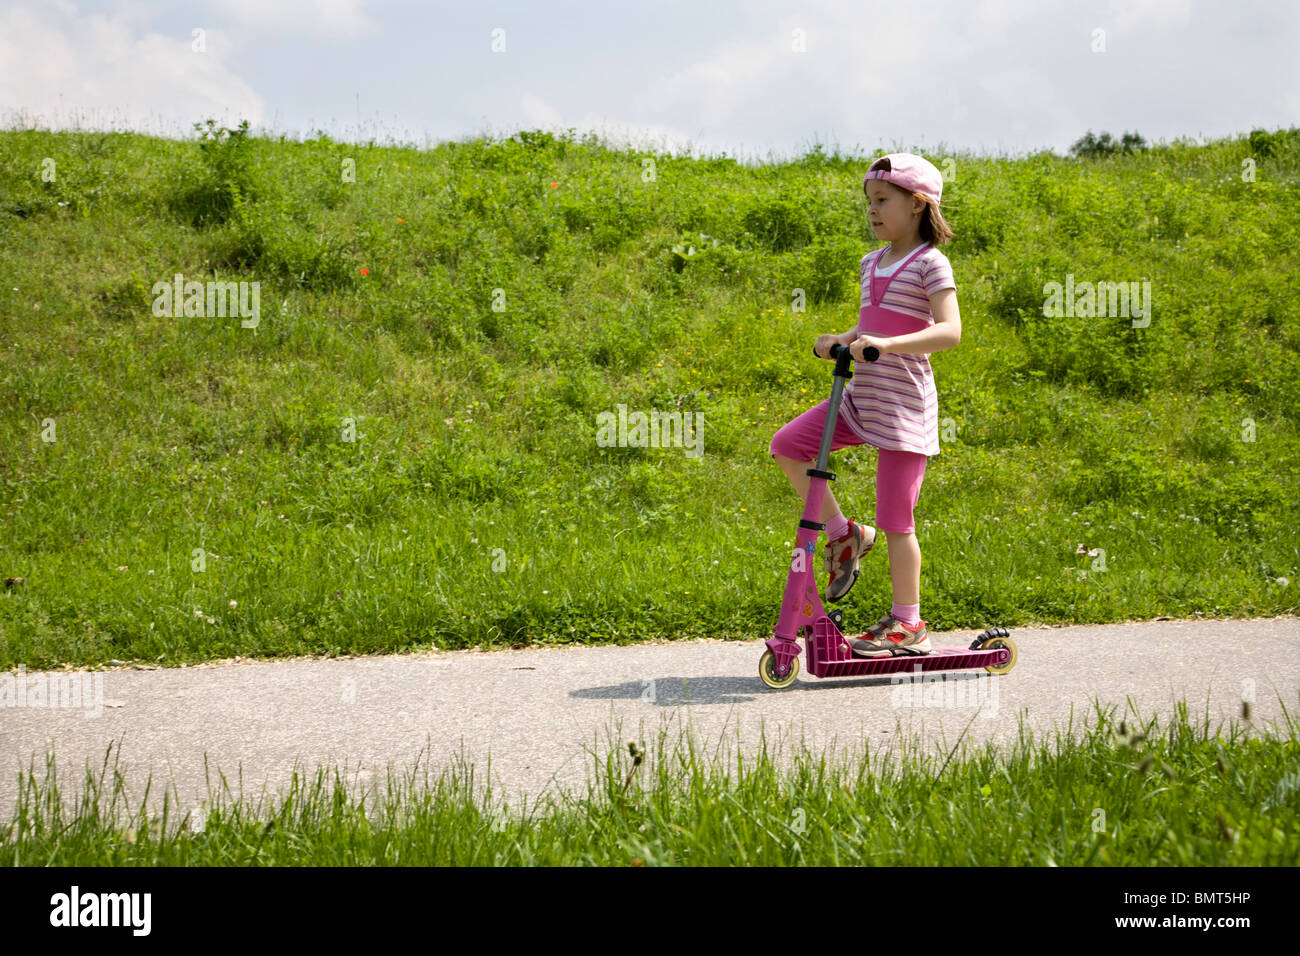 little girl on the scooter Stock Photo